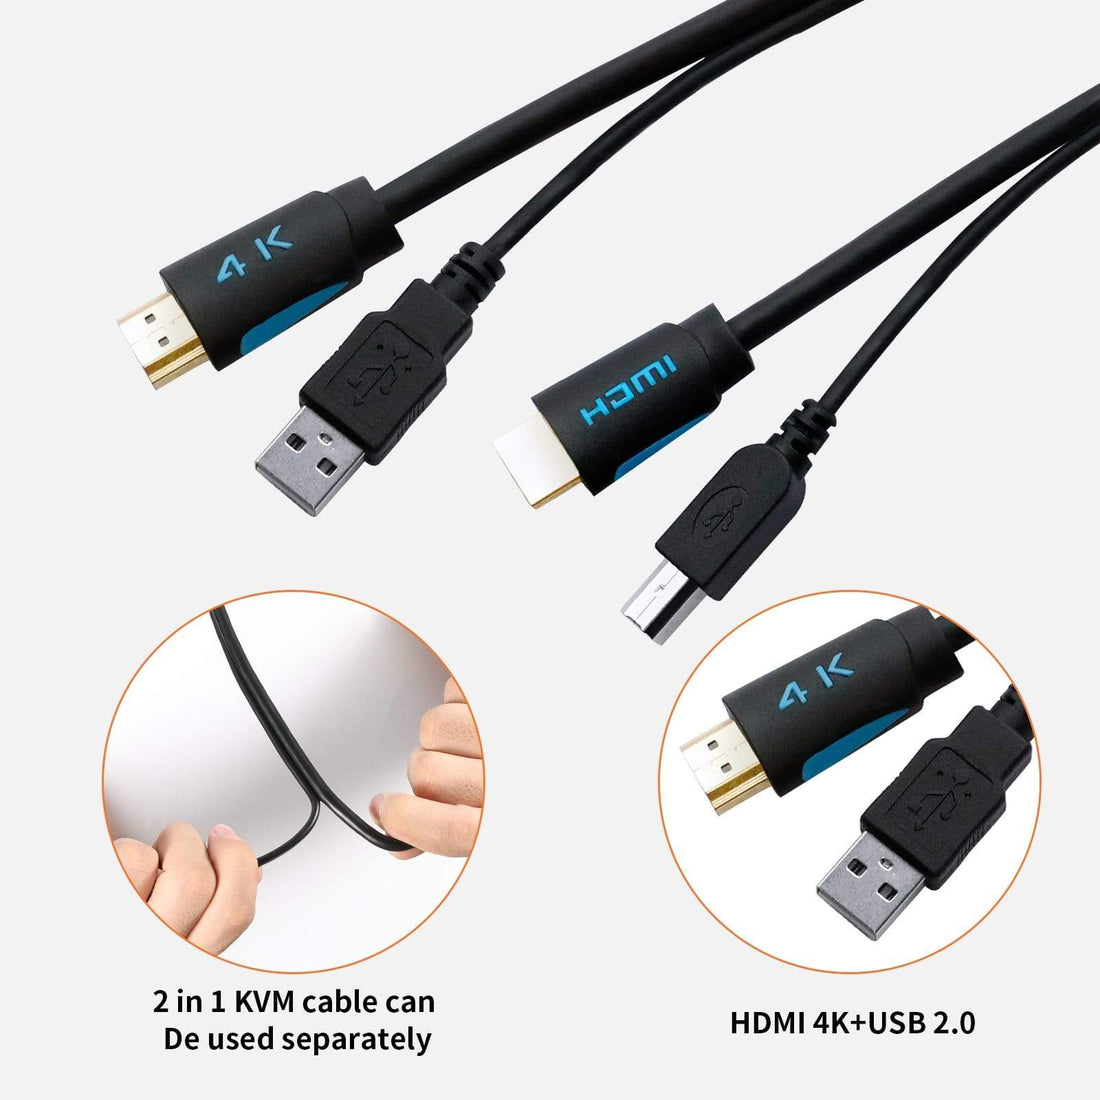 TESmart 2 Pcs 5ft Standard Twin Cable HDMI + USB KVM Cable USB Type A to USB Type B (2 Pcs/Lot USB + HDMI Cables) - image 4 of 6